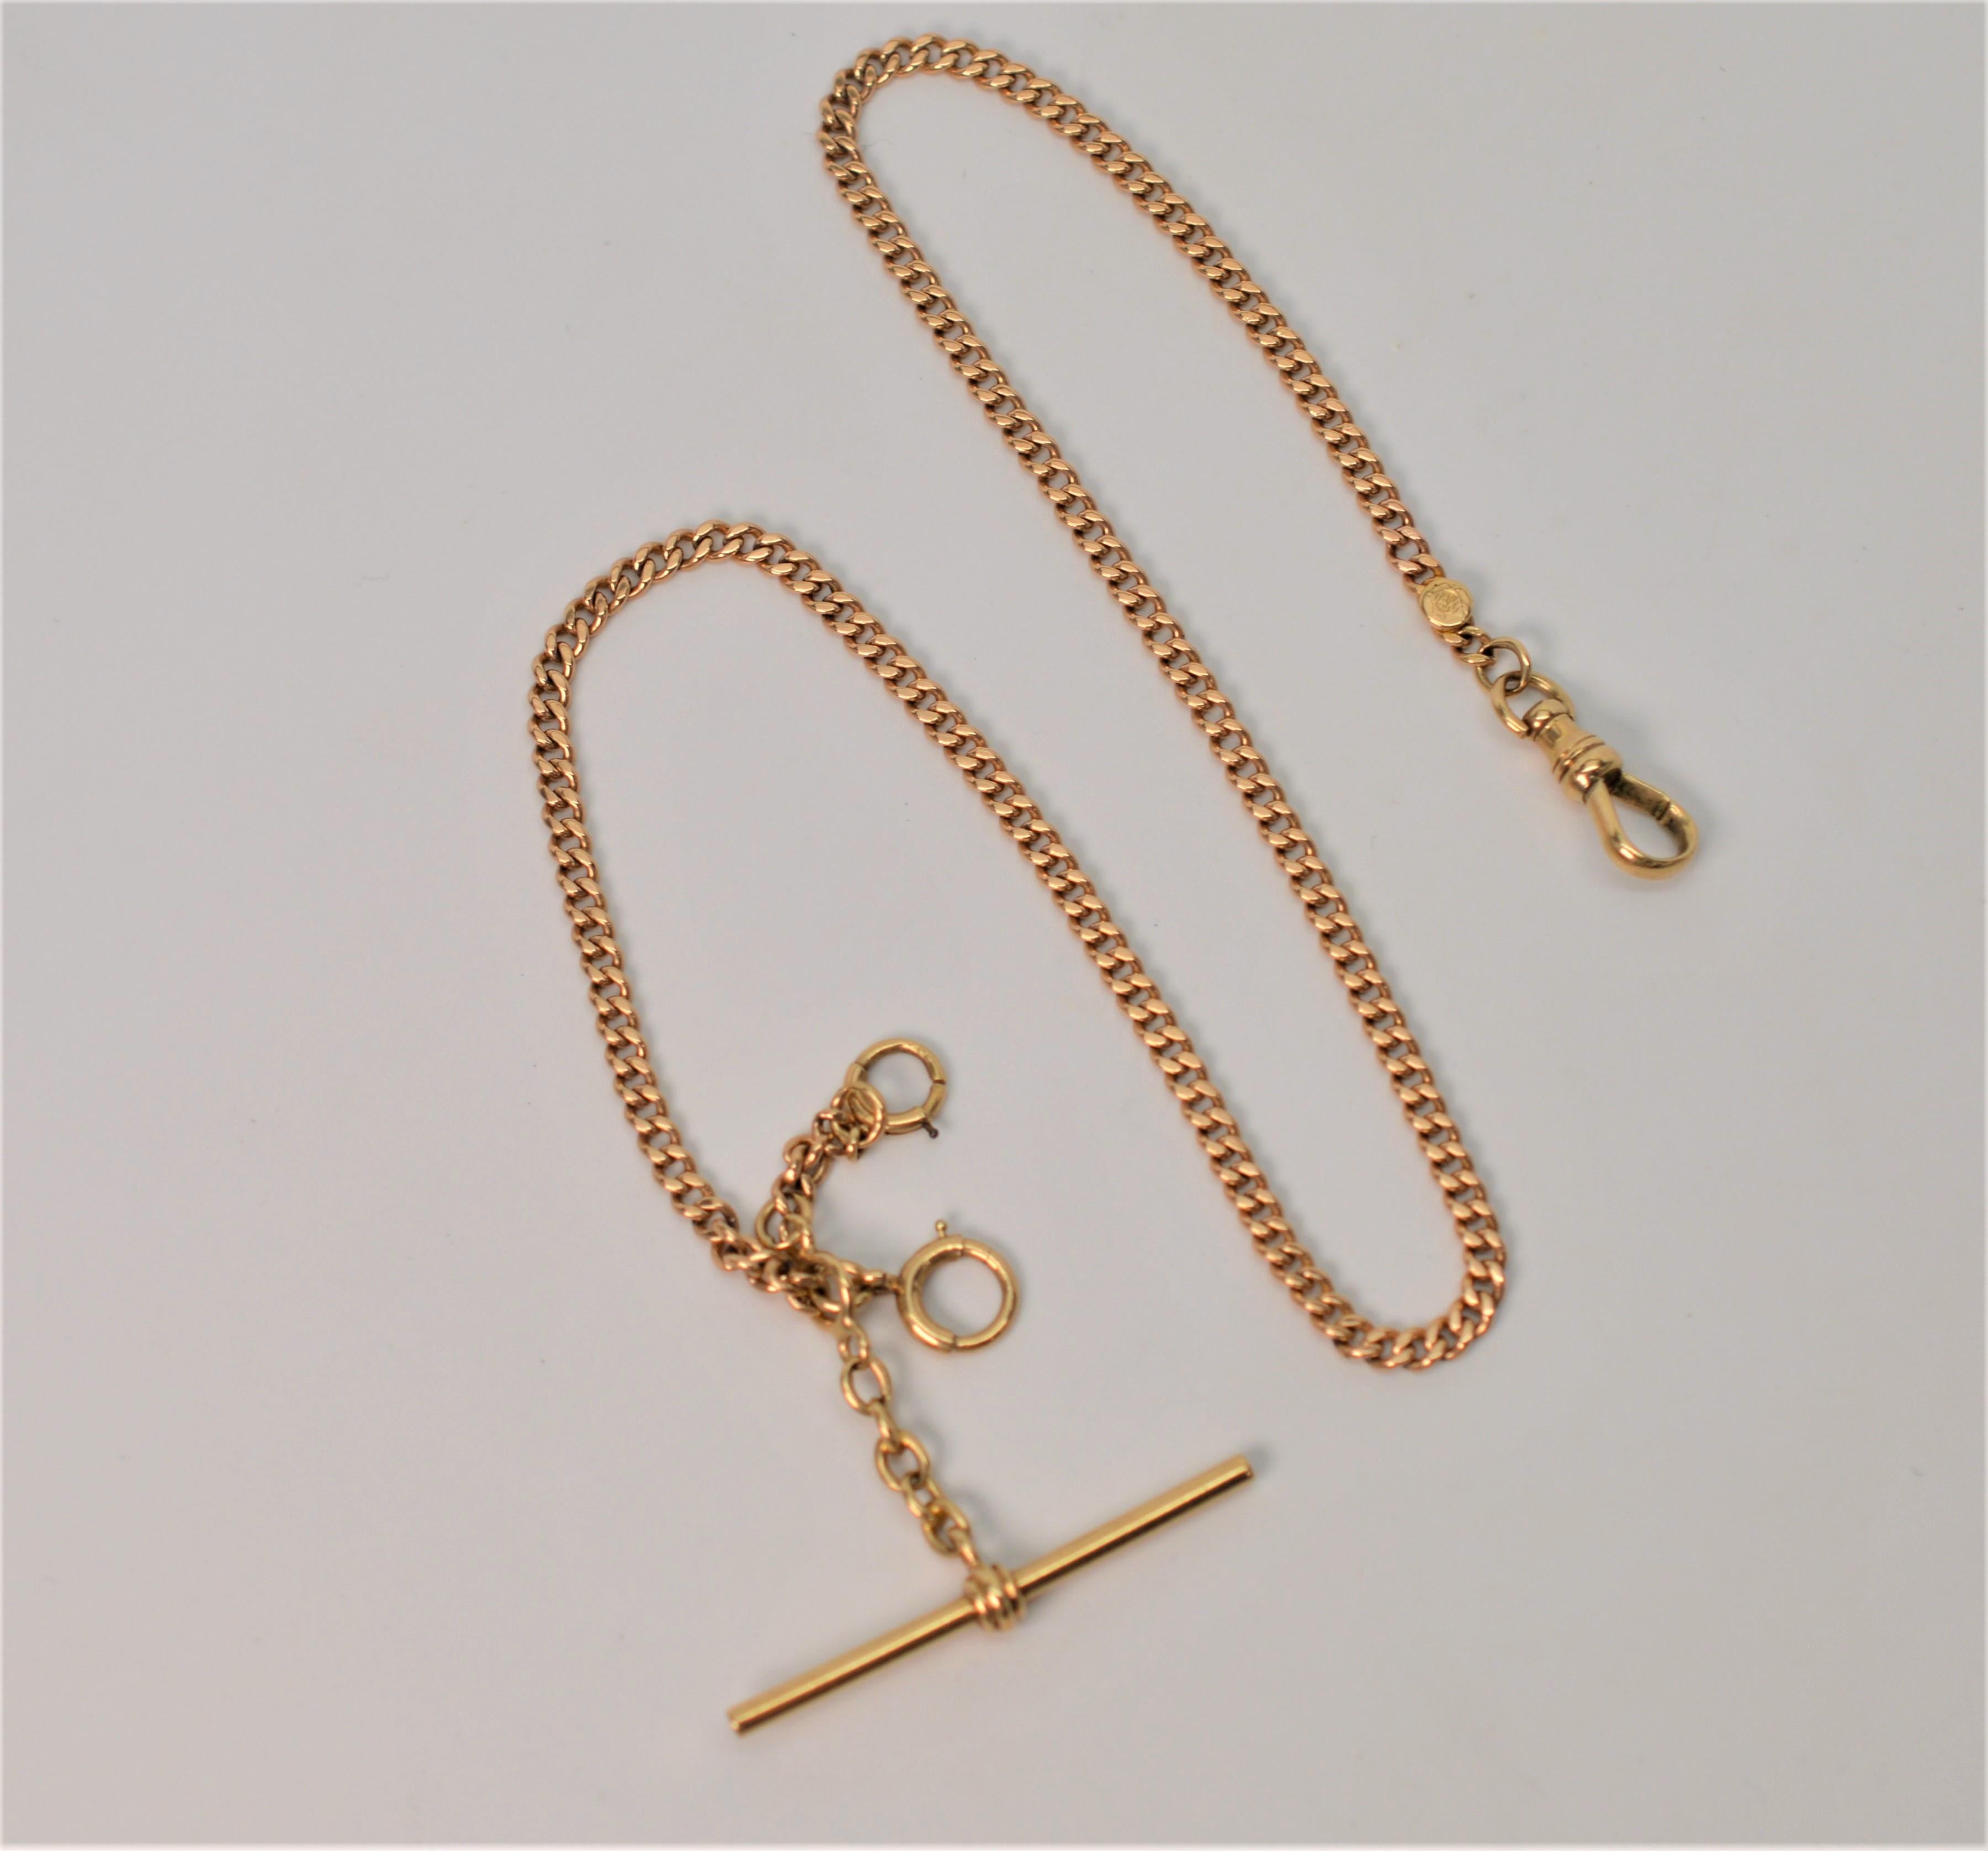 Antique American 14 Karat Yellow Gold Pocket Watch Chain. Three millimeter gauge chain with T-bar, non-swivel clip and two jump chains.
 Fourteen inches in length. In gift box.